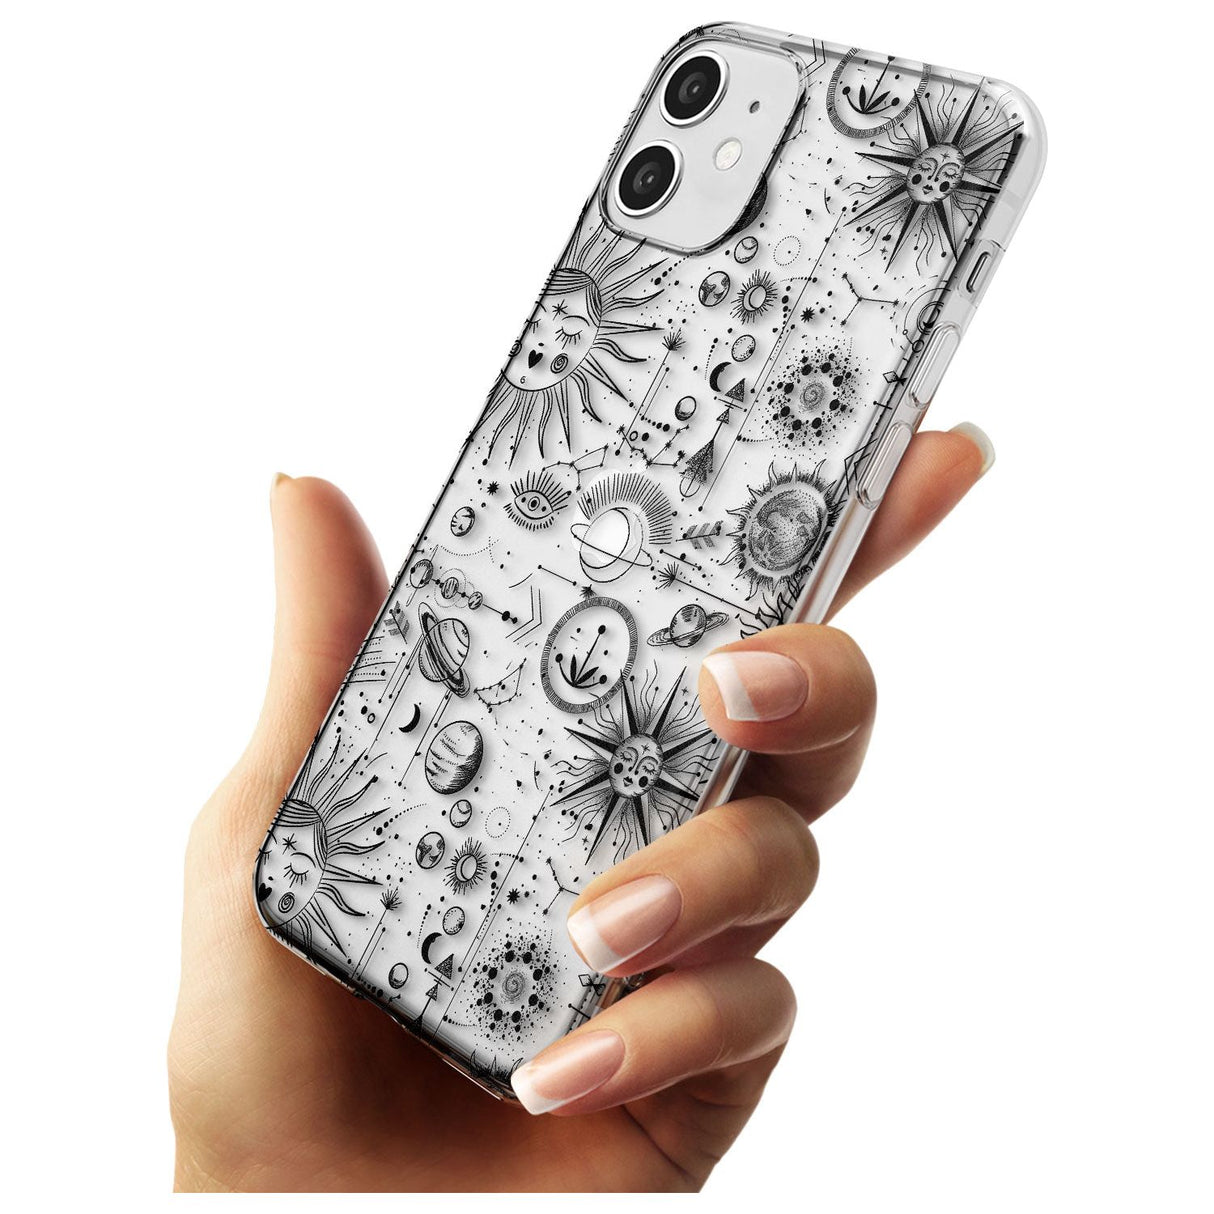 Suns & Planets Vintage Astrological Slim TPU Phone Case for iPhone 11